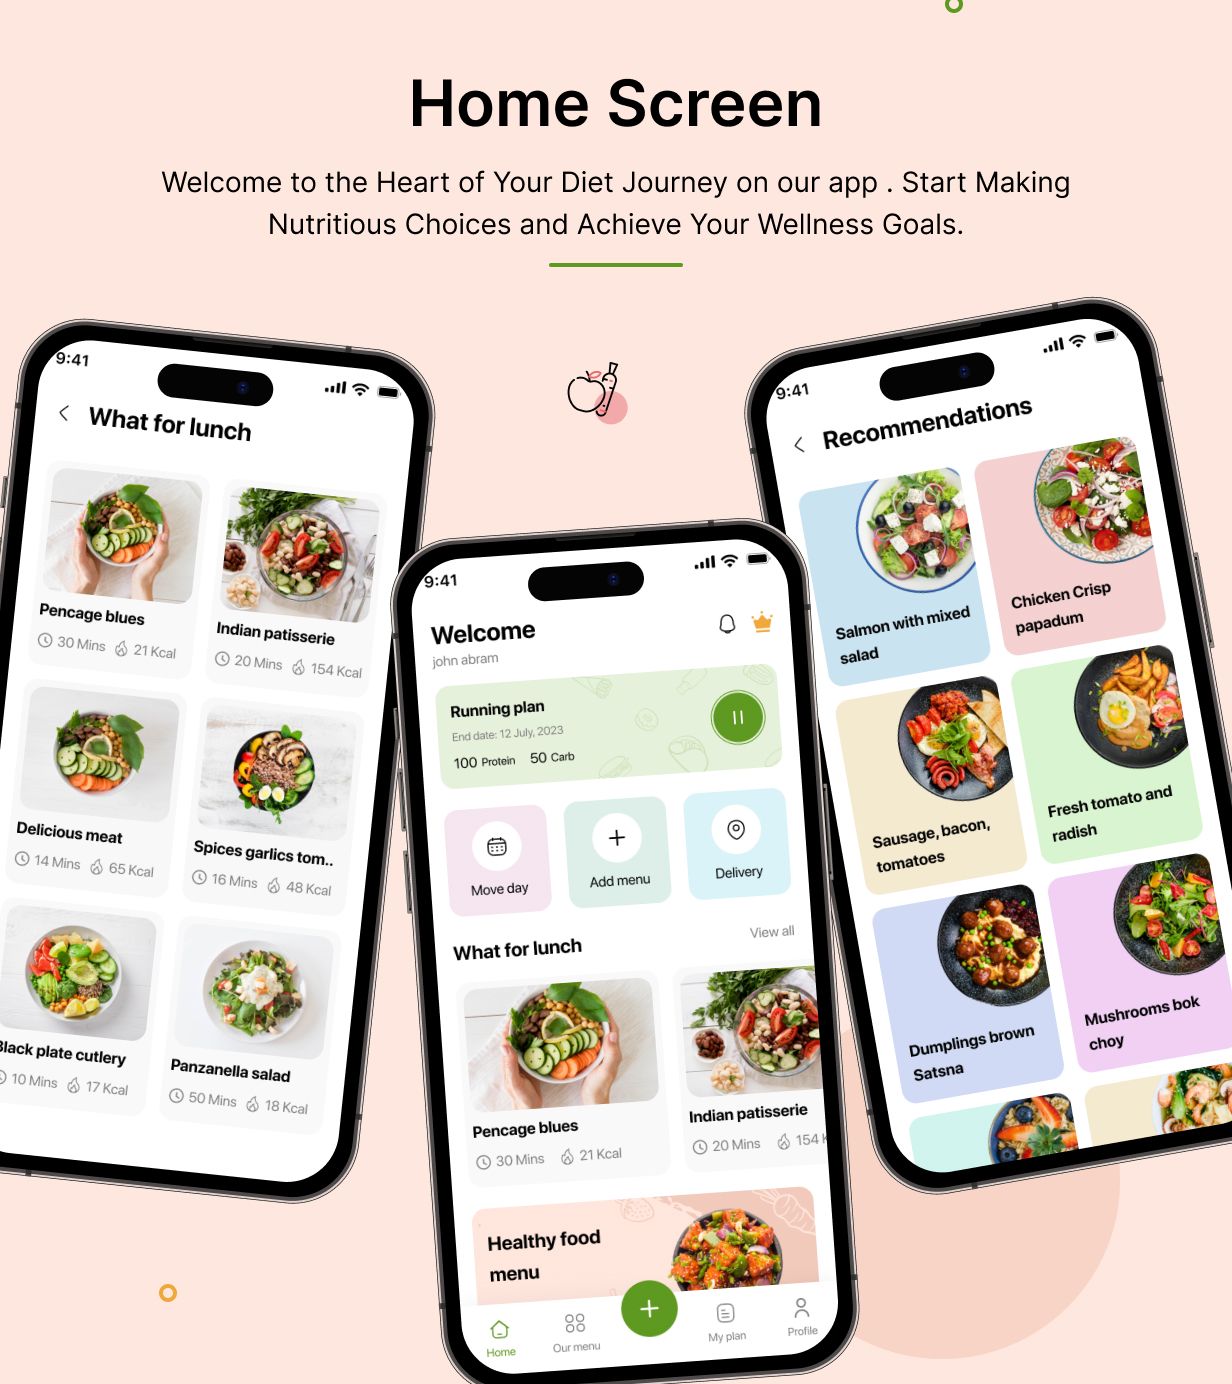 EatWise Template: Diet Recipe Planner App in Flutter(Android, iOS) | DailyDietGuide App - 7